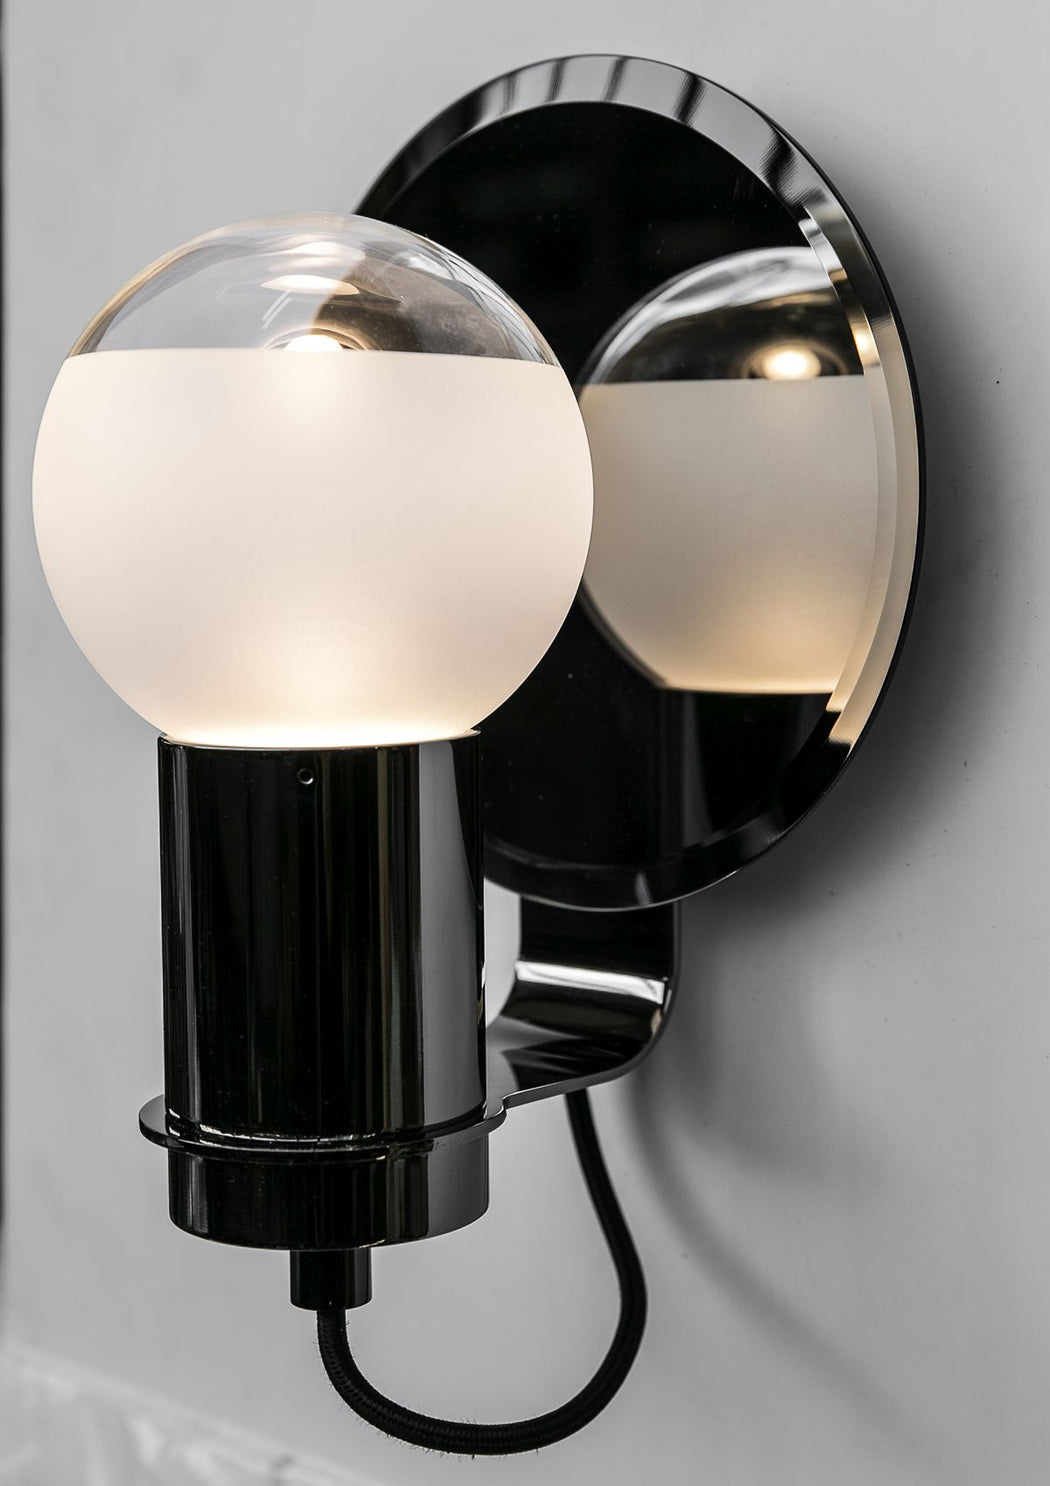 Deluxe Italian wall light with frosted glass diffuser and choice of metal finish